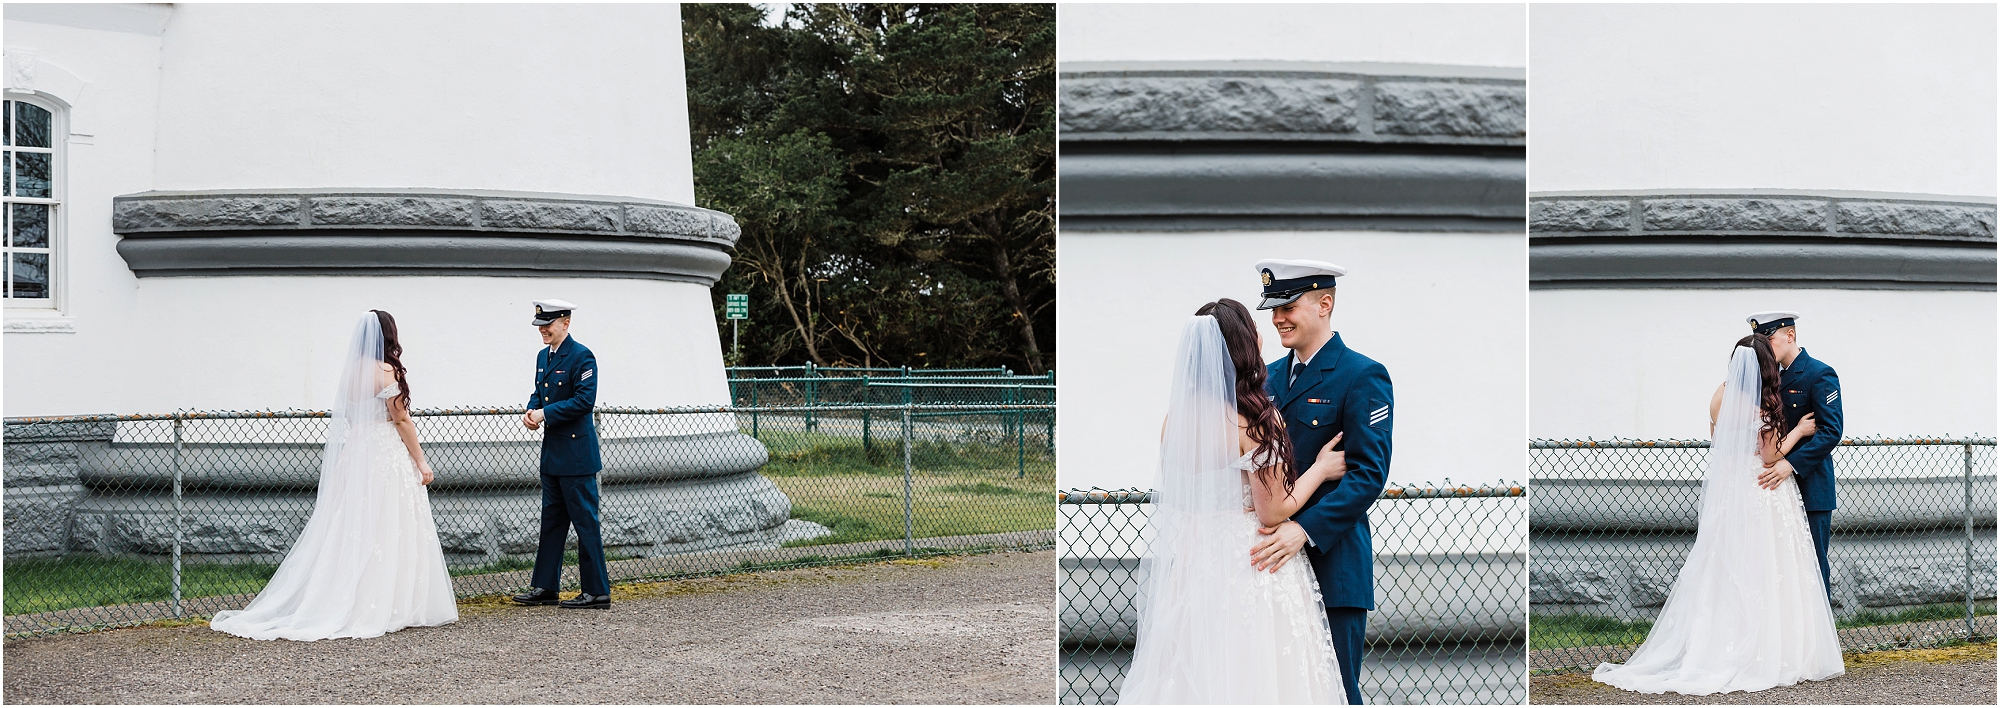 A groom, wearing his US Coast Guard navy uniform, sees his bride wearing a blush pink wedding dress and a white long veil in front of the Umpqua River Lighthouse along the Oregon Coast. | Erica Swantek Photography